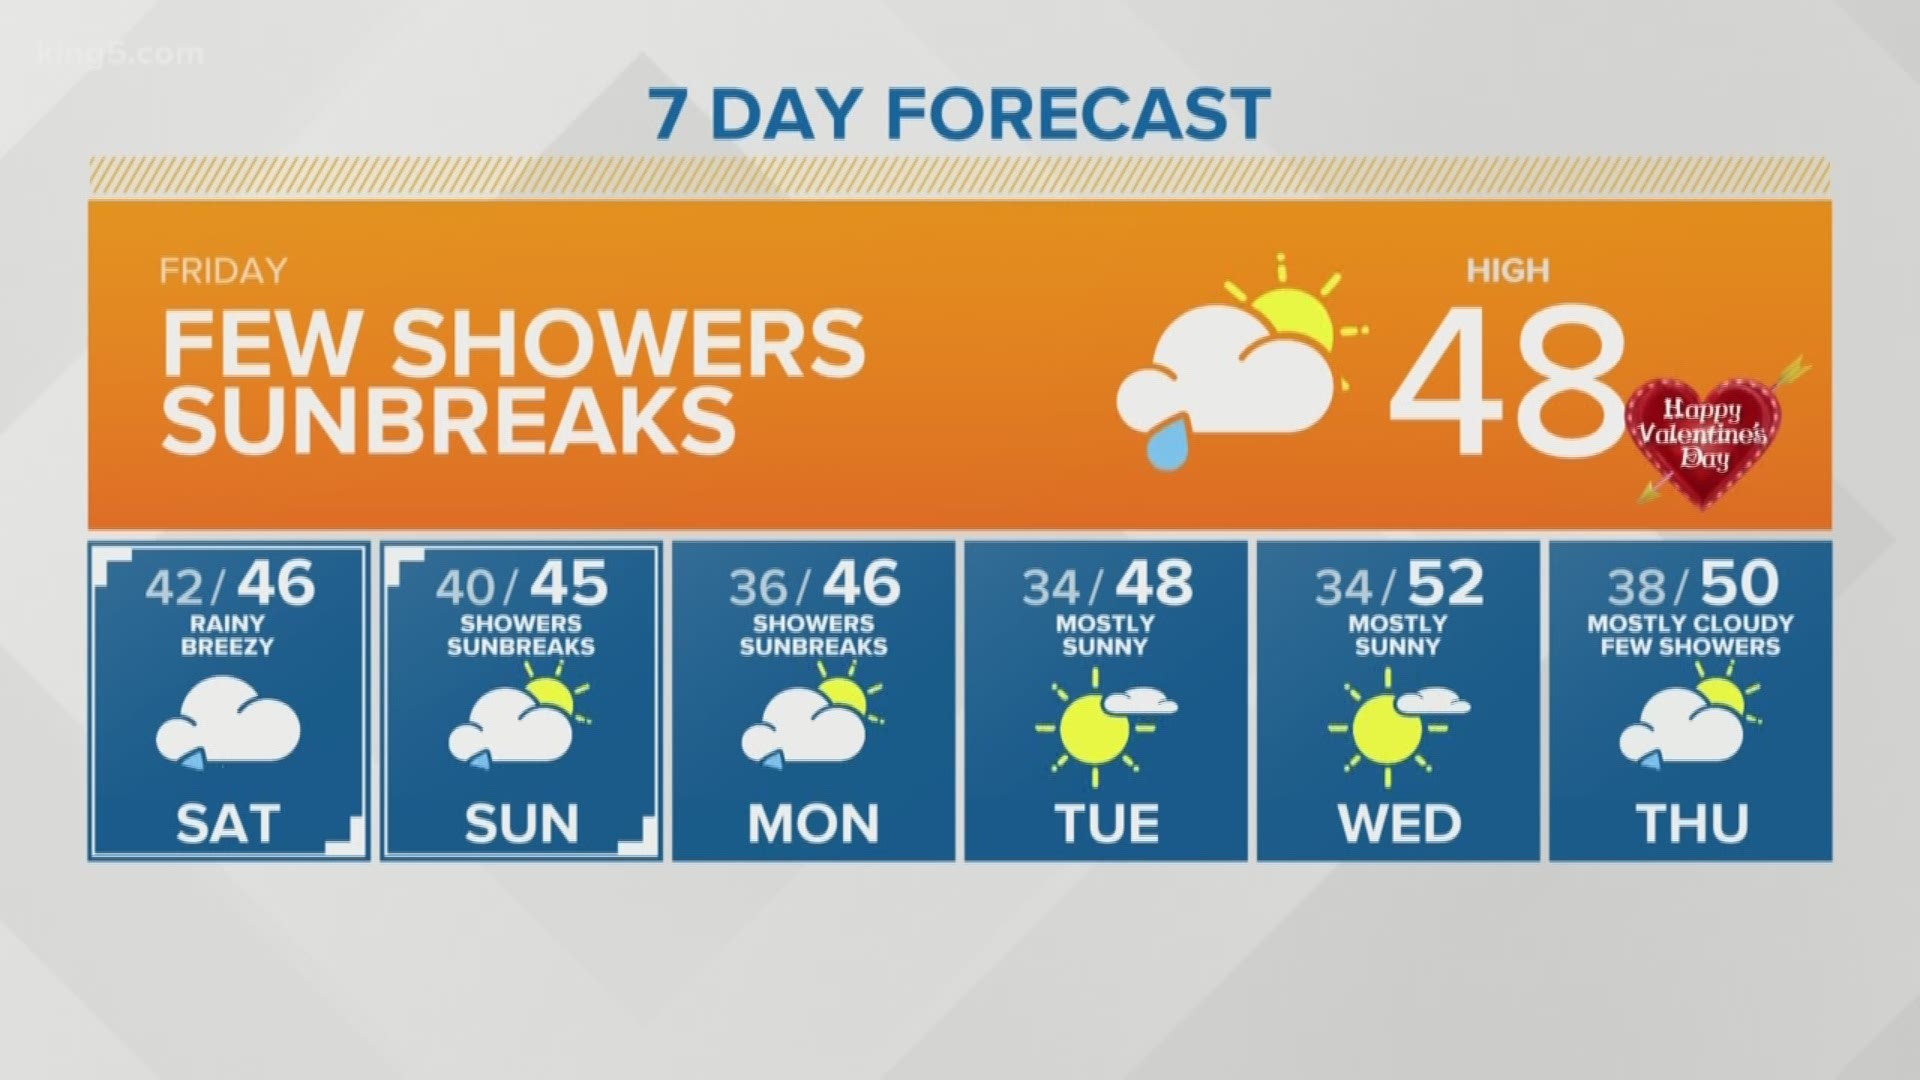 2/14/20 morning forecast with KING 5 Meteorologist Rich Marriott.